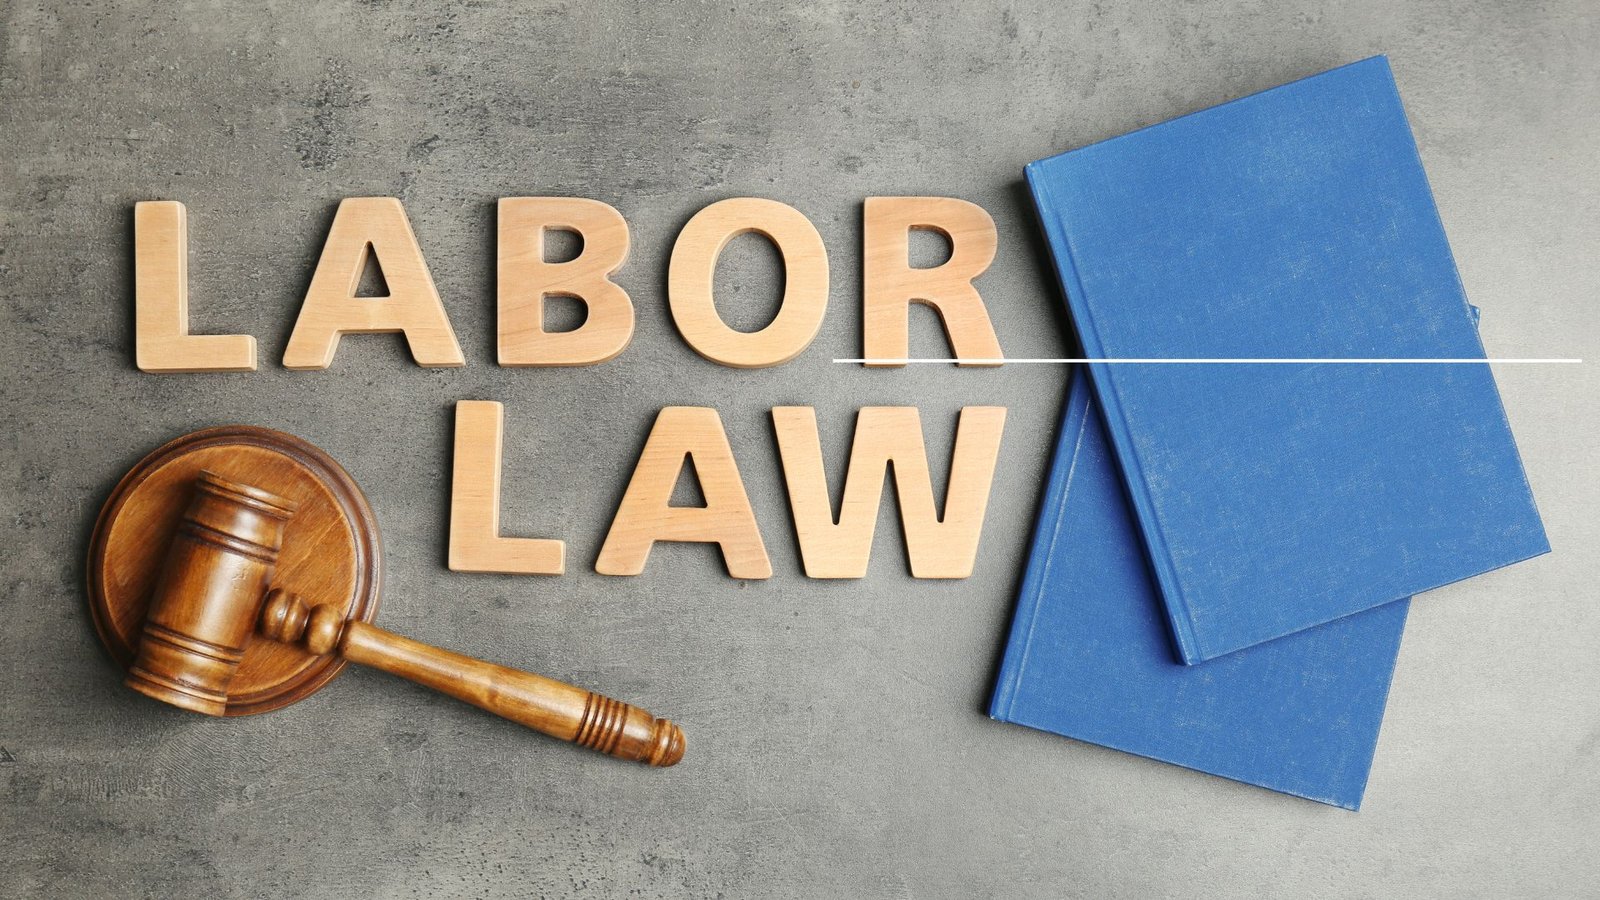 Indian Labour Law, lawforeverything